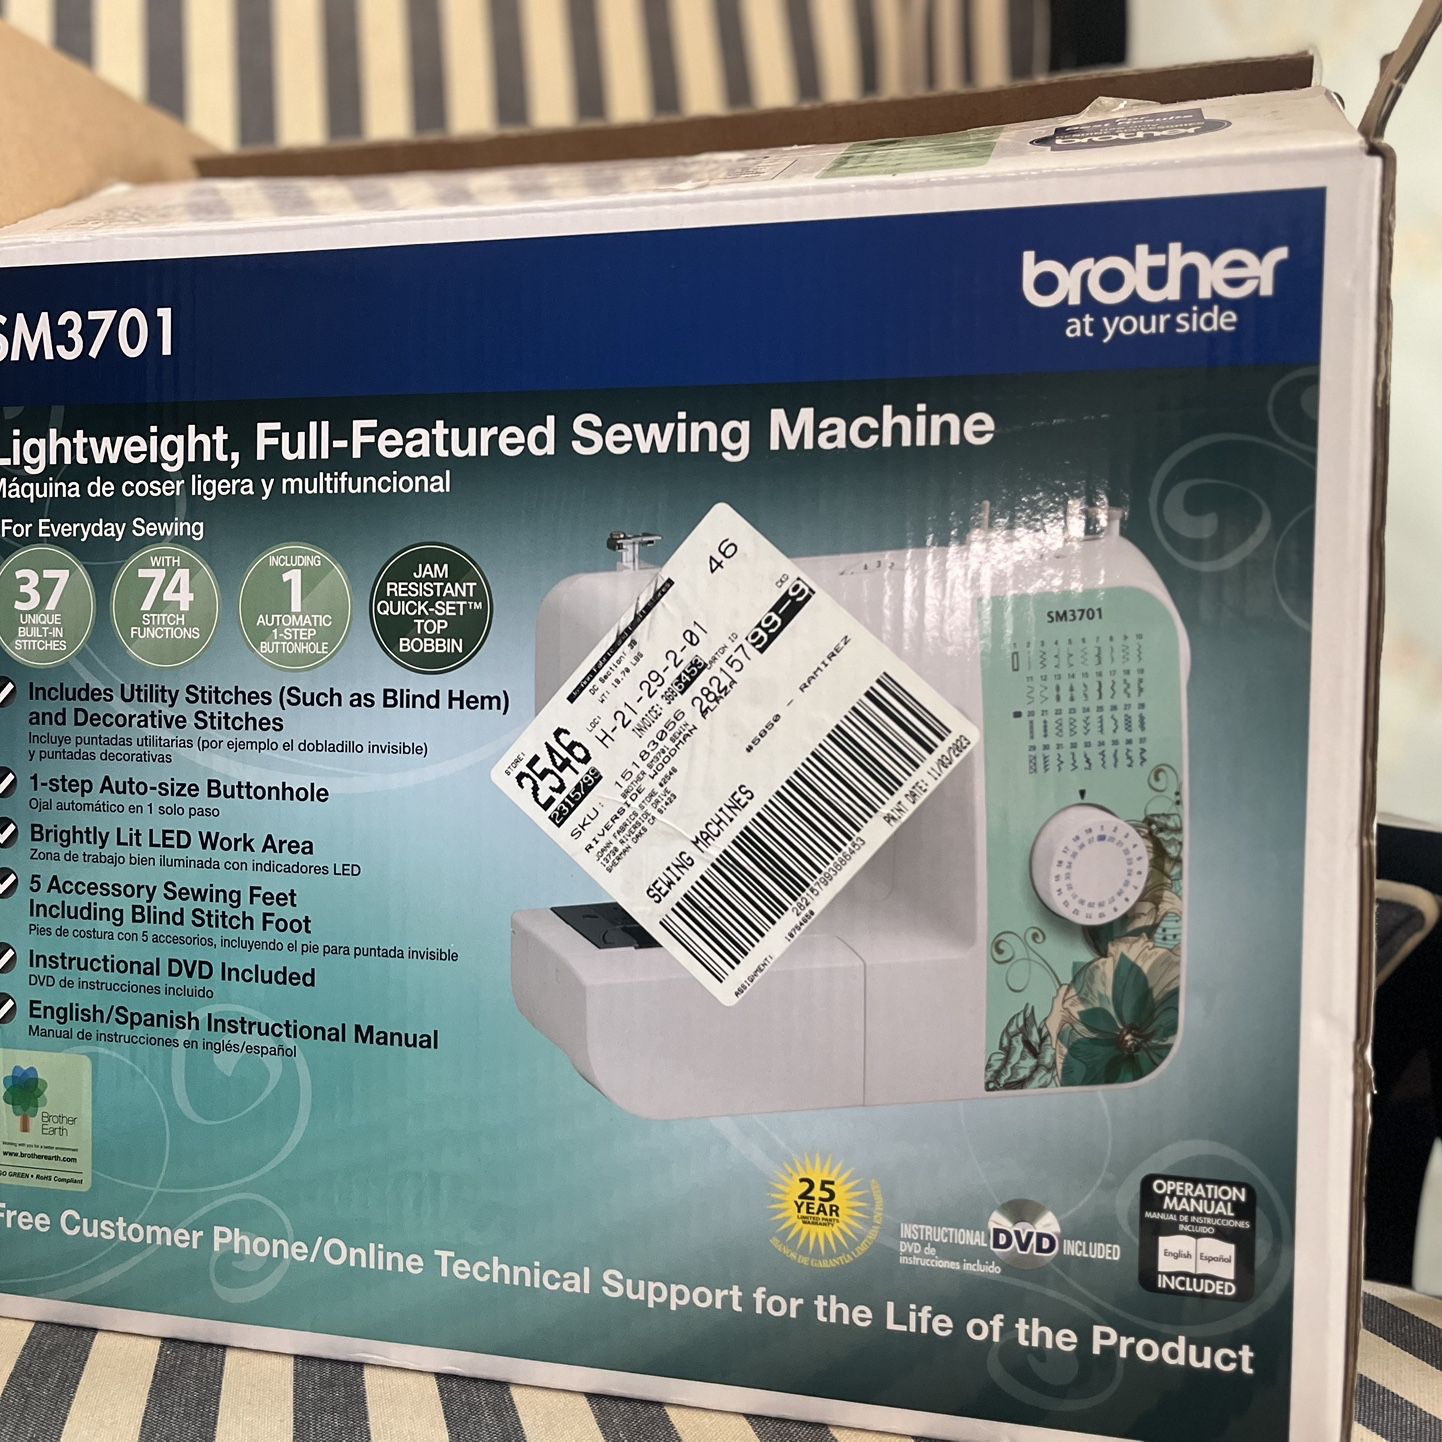 Brother SM3701 Sewing Machine, Brand New, Used Once. 